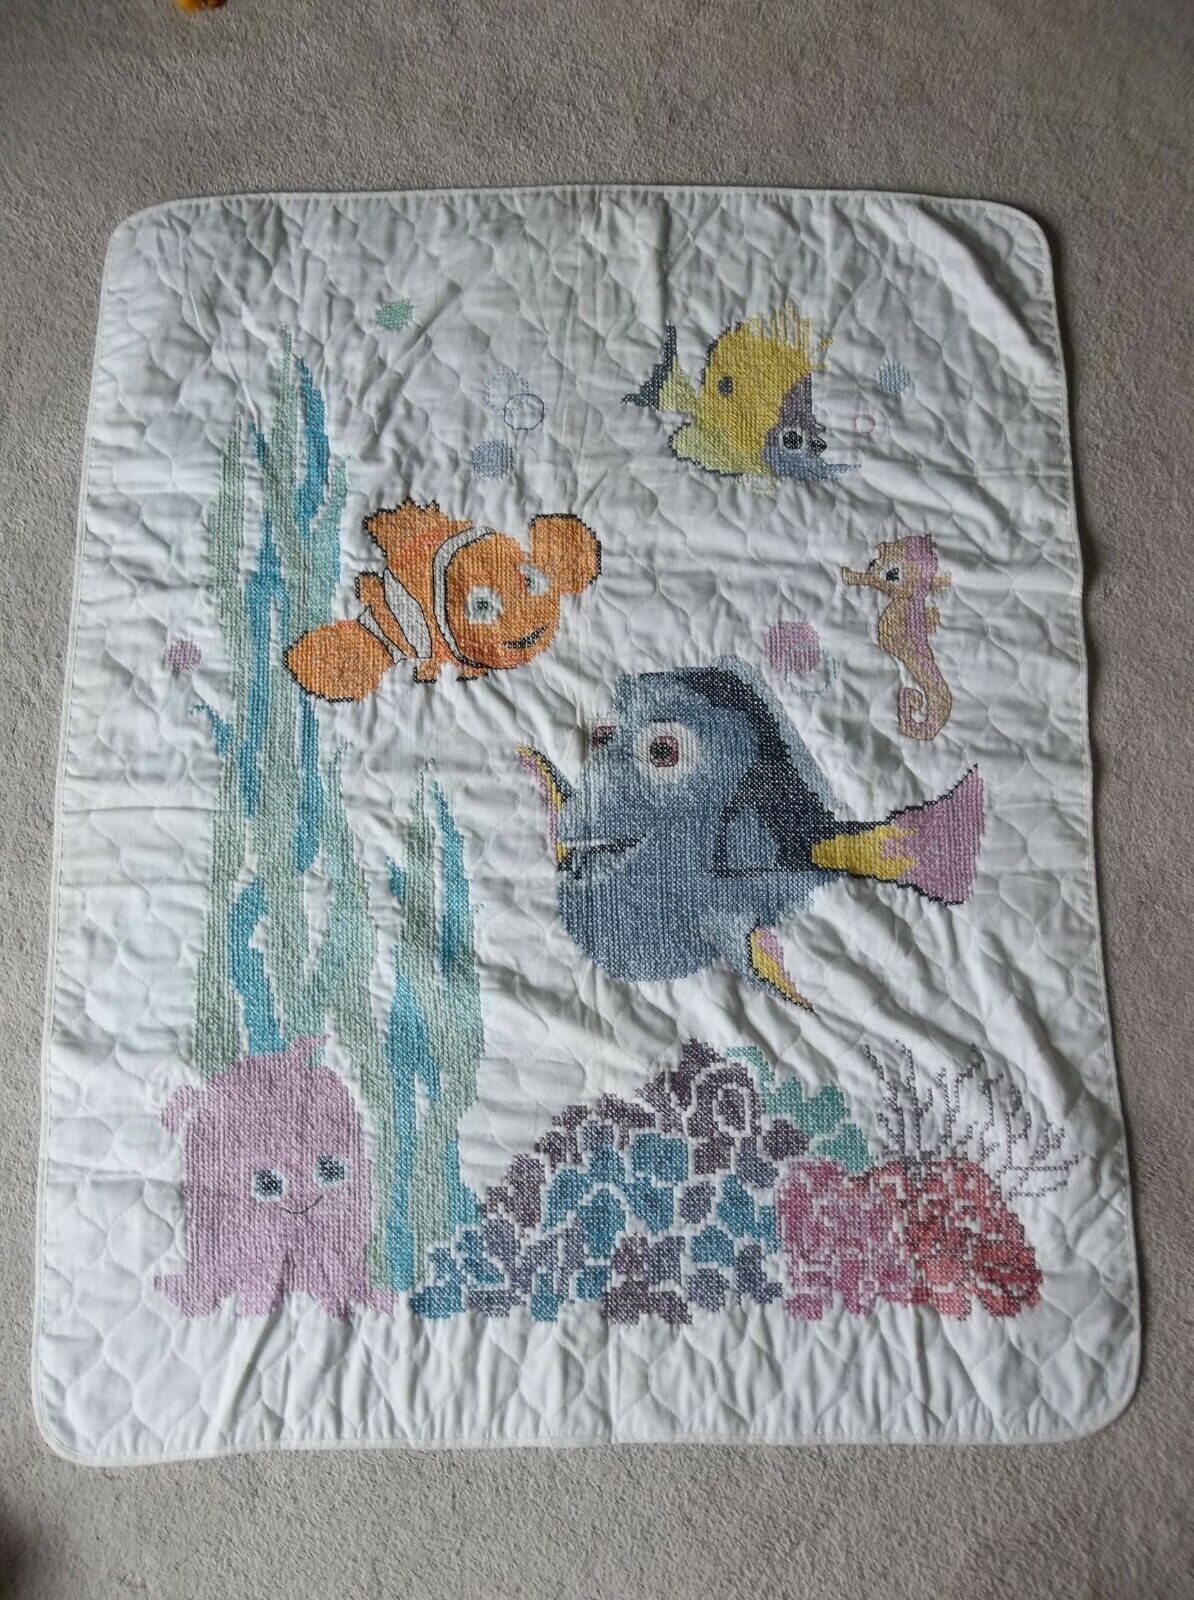 Completed Embroidered Sea Creatures "dora The Explorer" Baby Cover Quilt